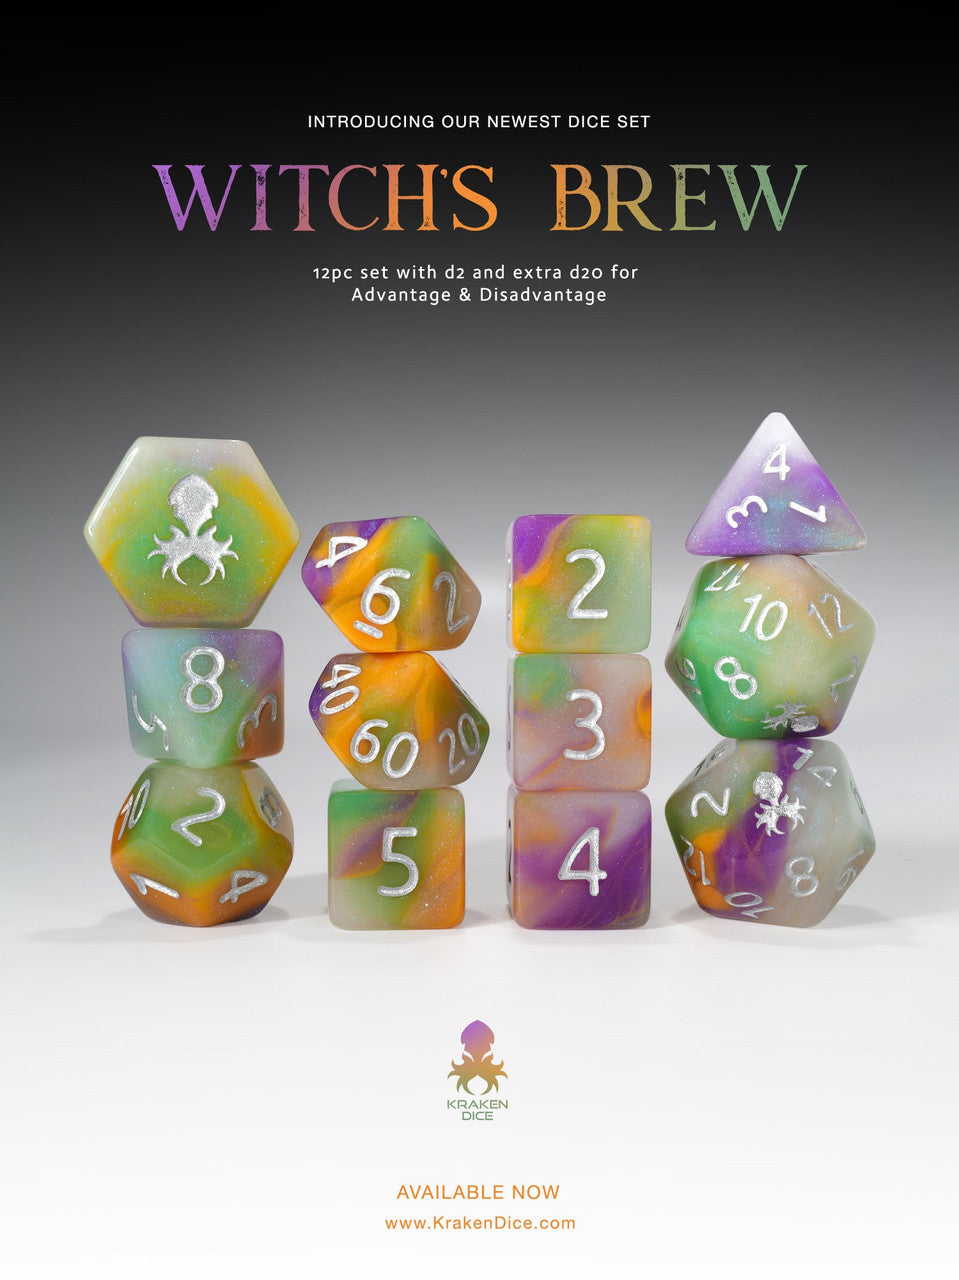 Witches Brew 12pc Glow in the Dark RPG Dice Set